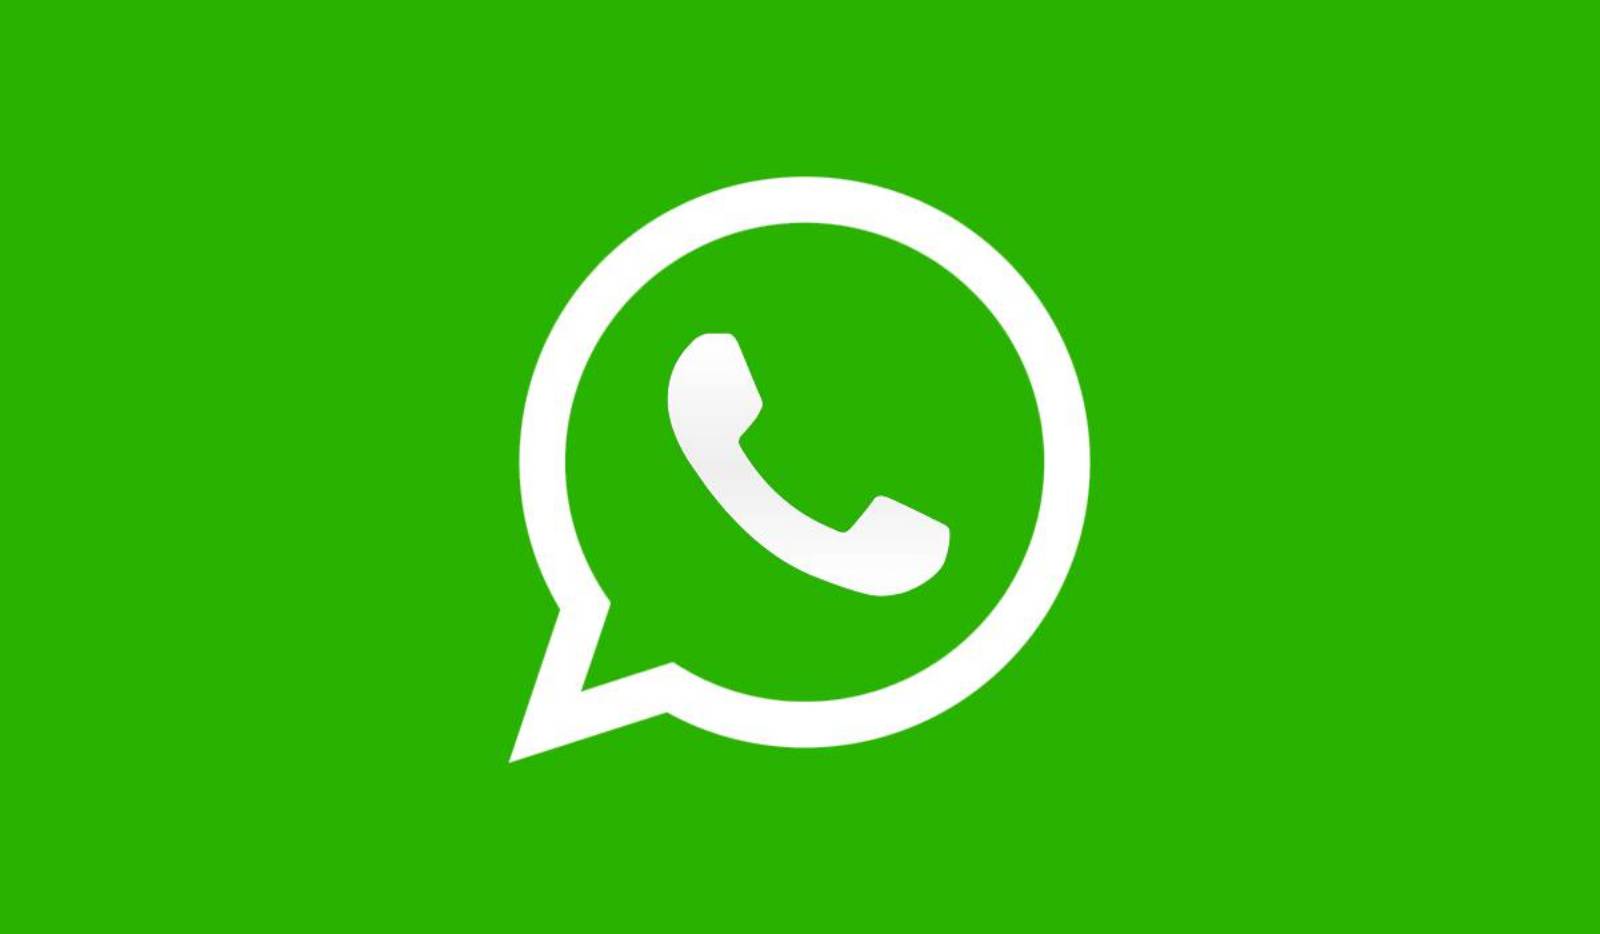 WhatsApp. CAREFUL! Very SERIOUS PROBLEM for Phones